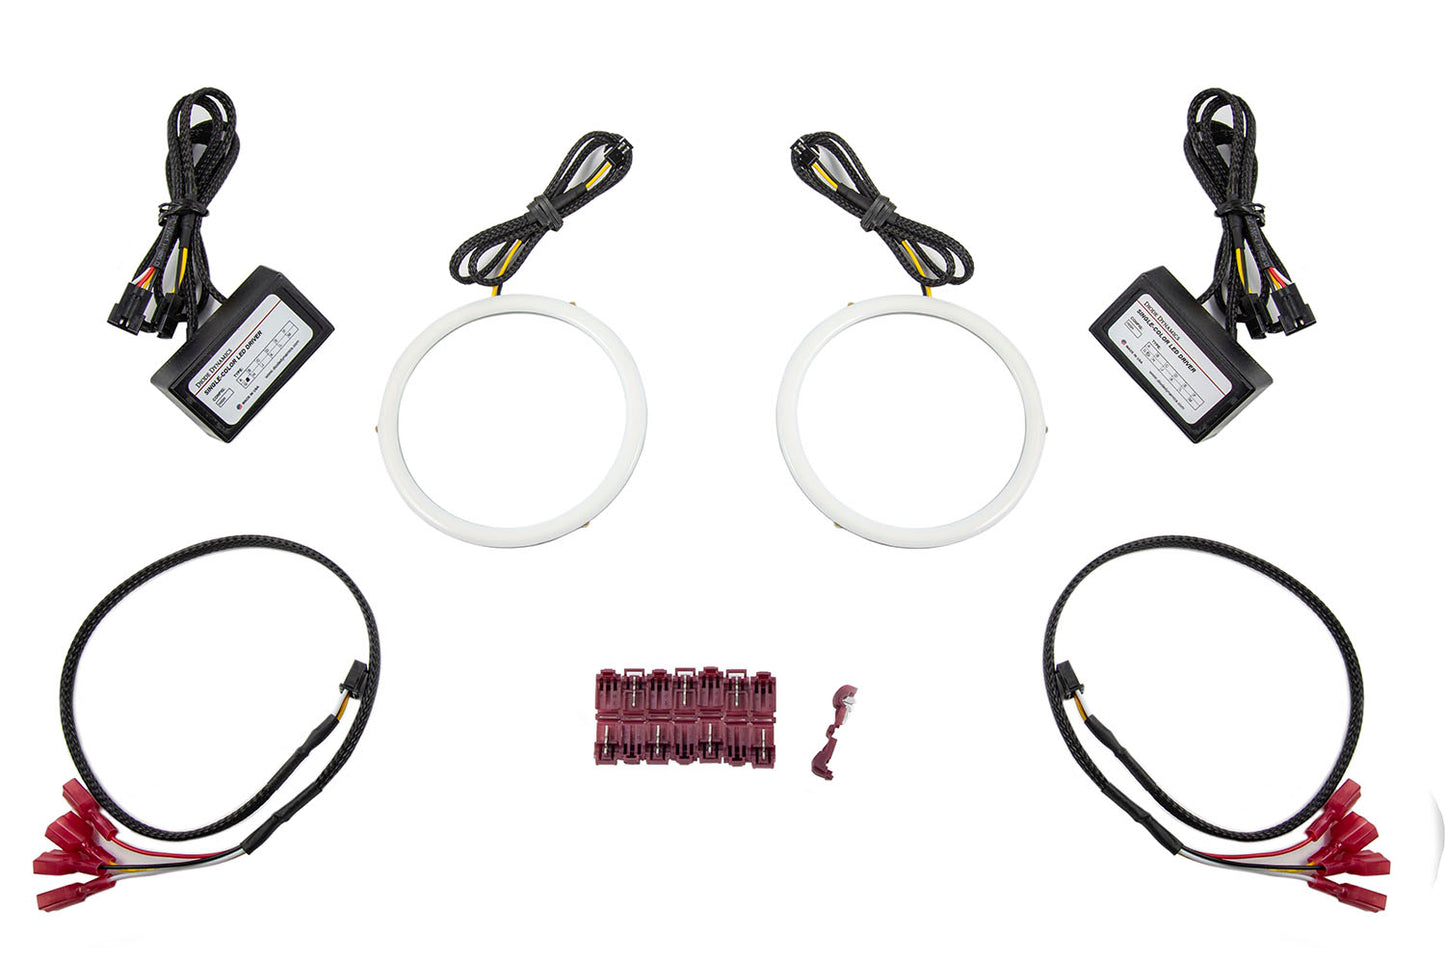 Halo Lights LED 60mm Switchback Pair Diode Dynamics